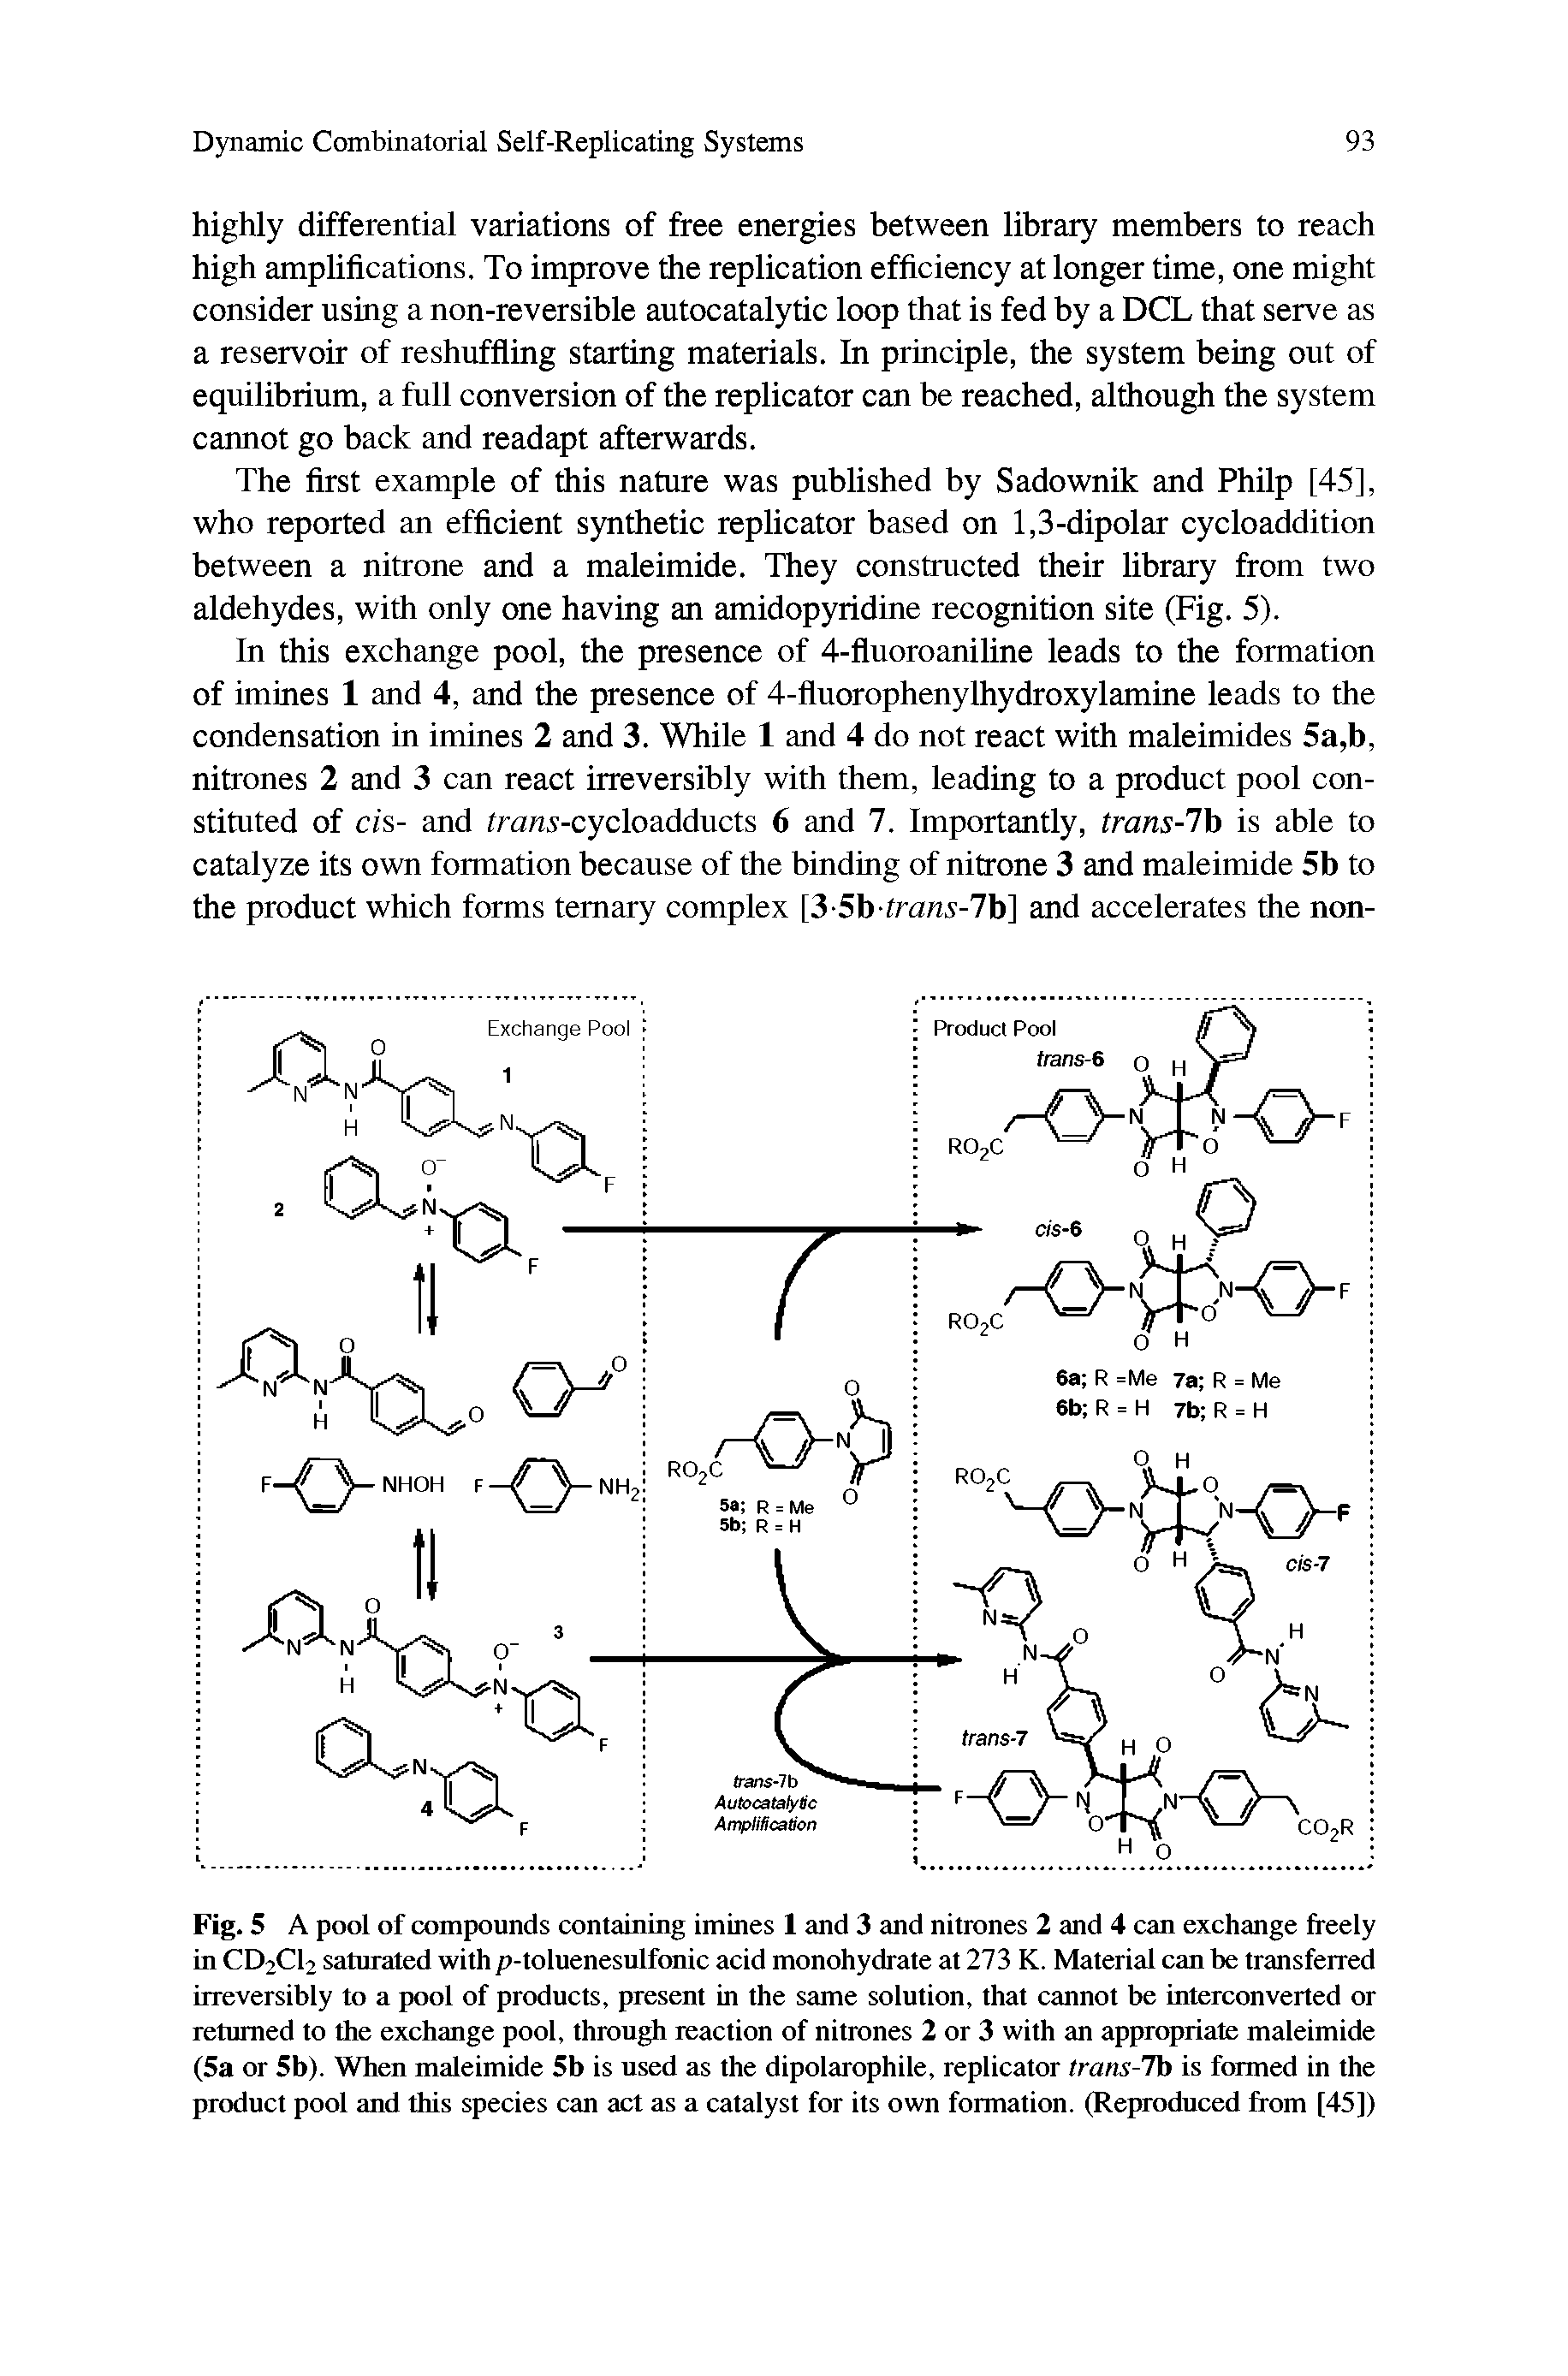 Fig. 5 A pool of compounds containing imines I and 3 and nitrones 2 and 4 can exchange freely in CD2C12 saturated with p-toluenesulfonic acid monohydrate at 273 K. Material can be transferred irreversibly to a pool of products, present in the same solution, that cannot be interconverted or returned to the exchange pool, through reaction of nitrones 2 or 3 with an appropriate maleimide (5a or 5b). When maleimide 5b is used as the dipolarophile, replicator trans-lb is formed in the product pool and this species can act as a catalyst for its own formation. (Reproduced from [45])...